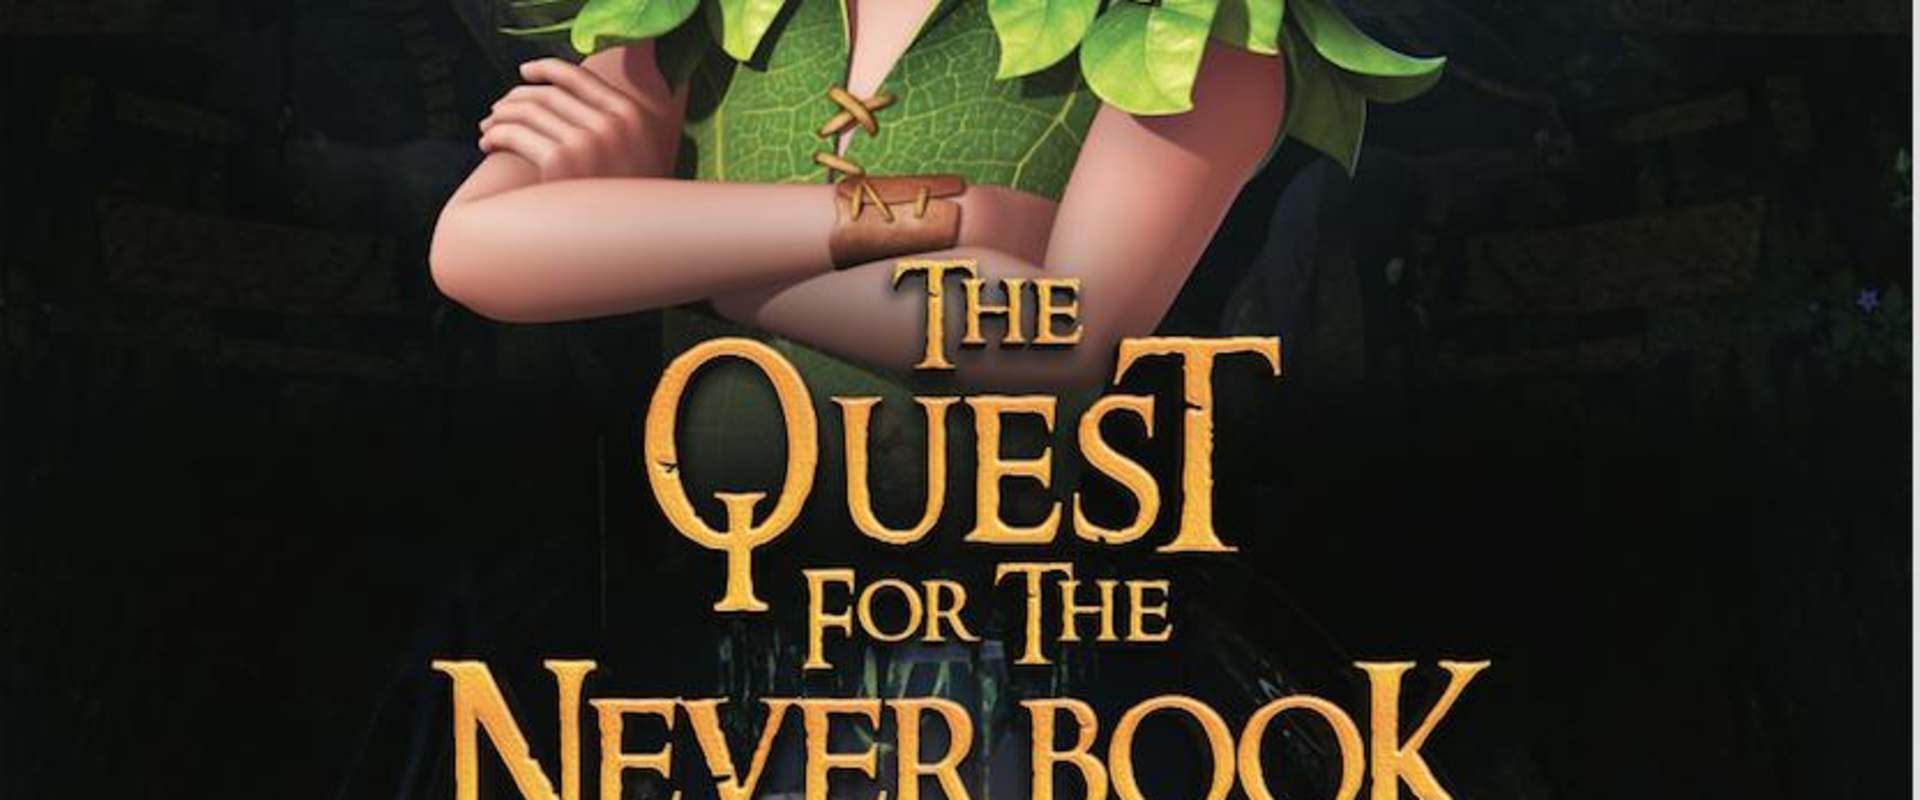 Peter Pan: The Quest for the Never Book background 1